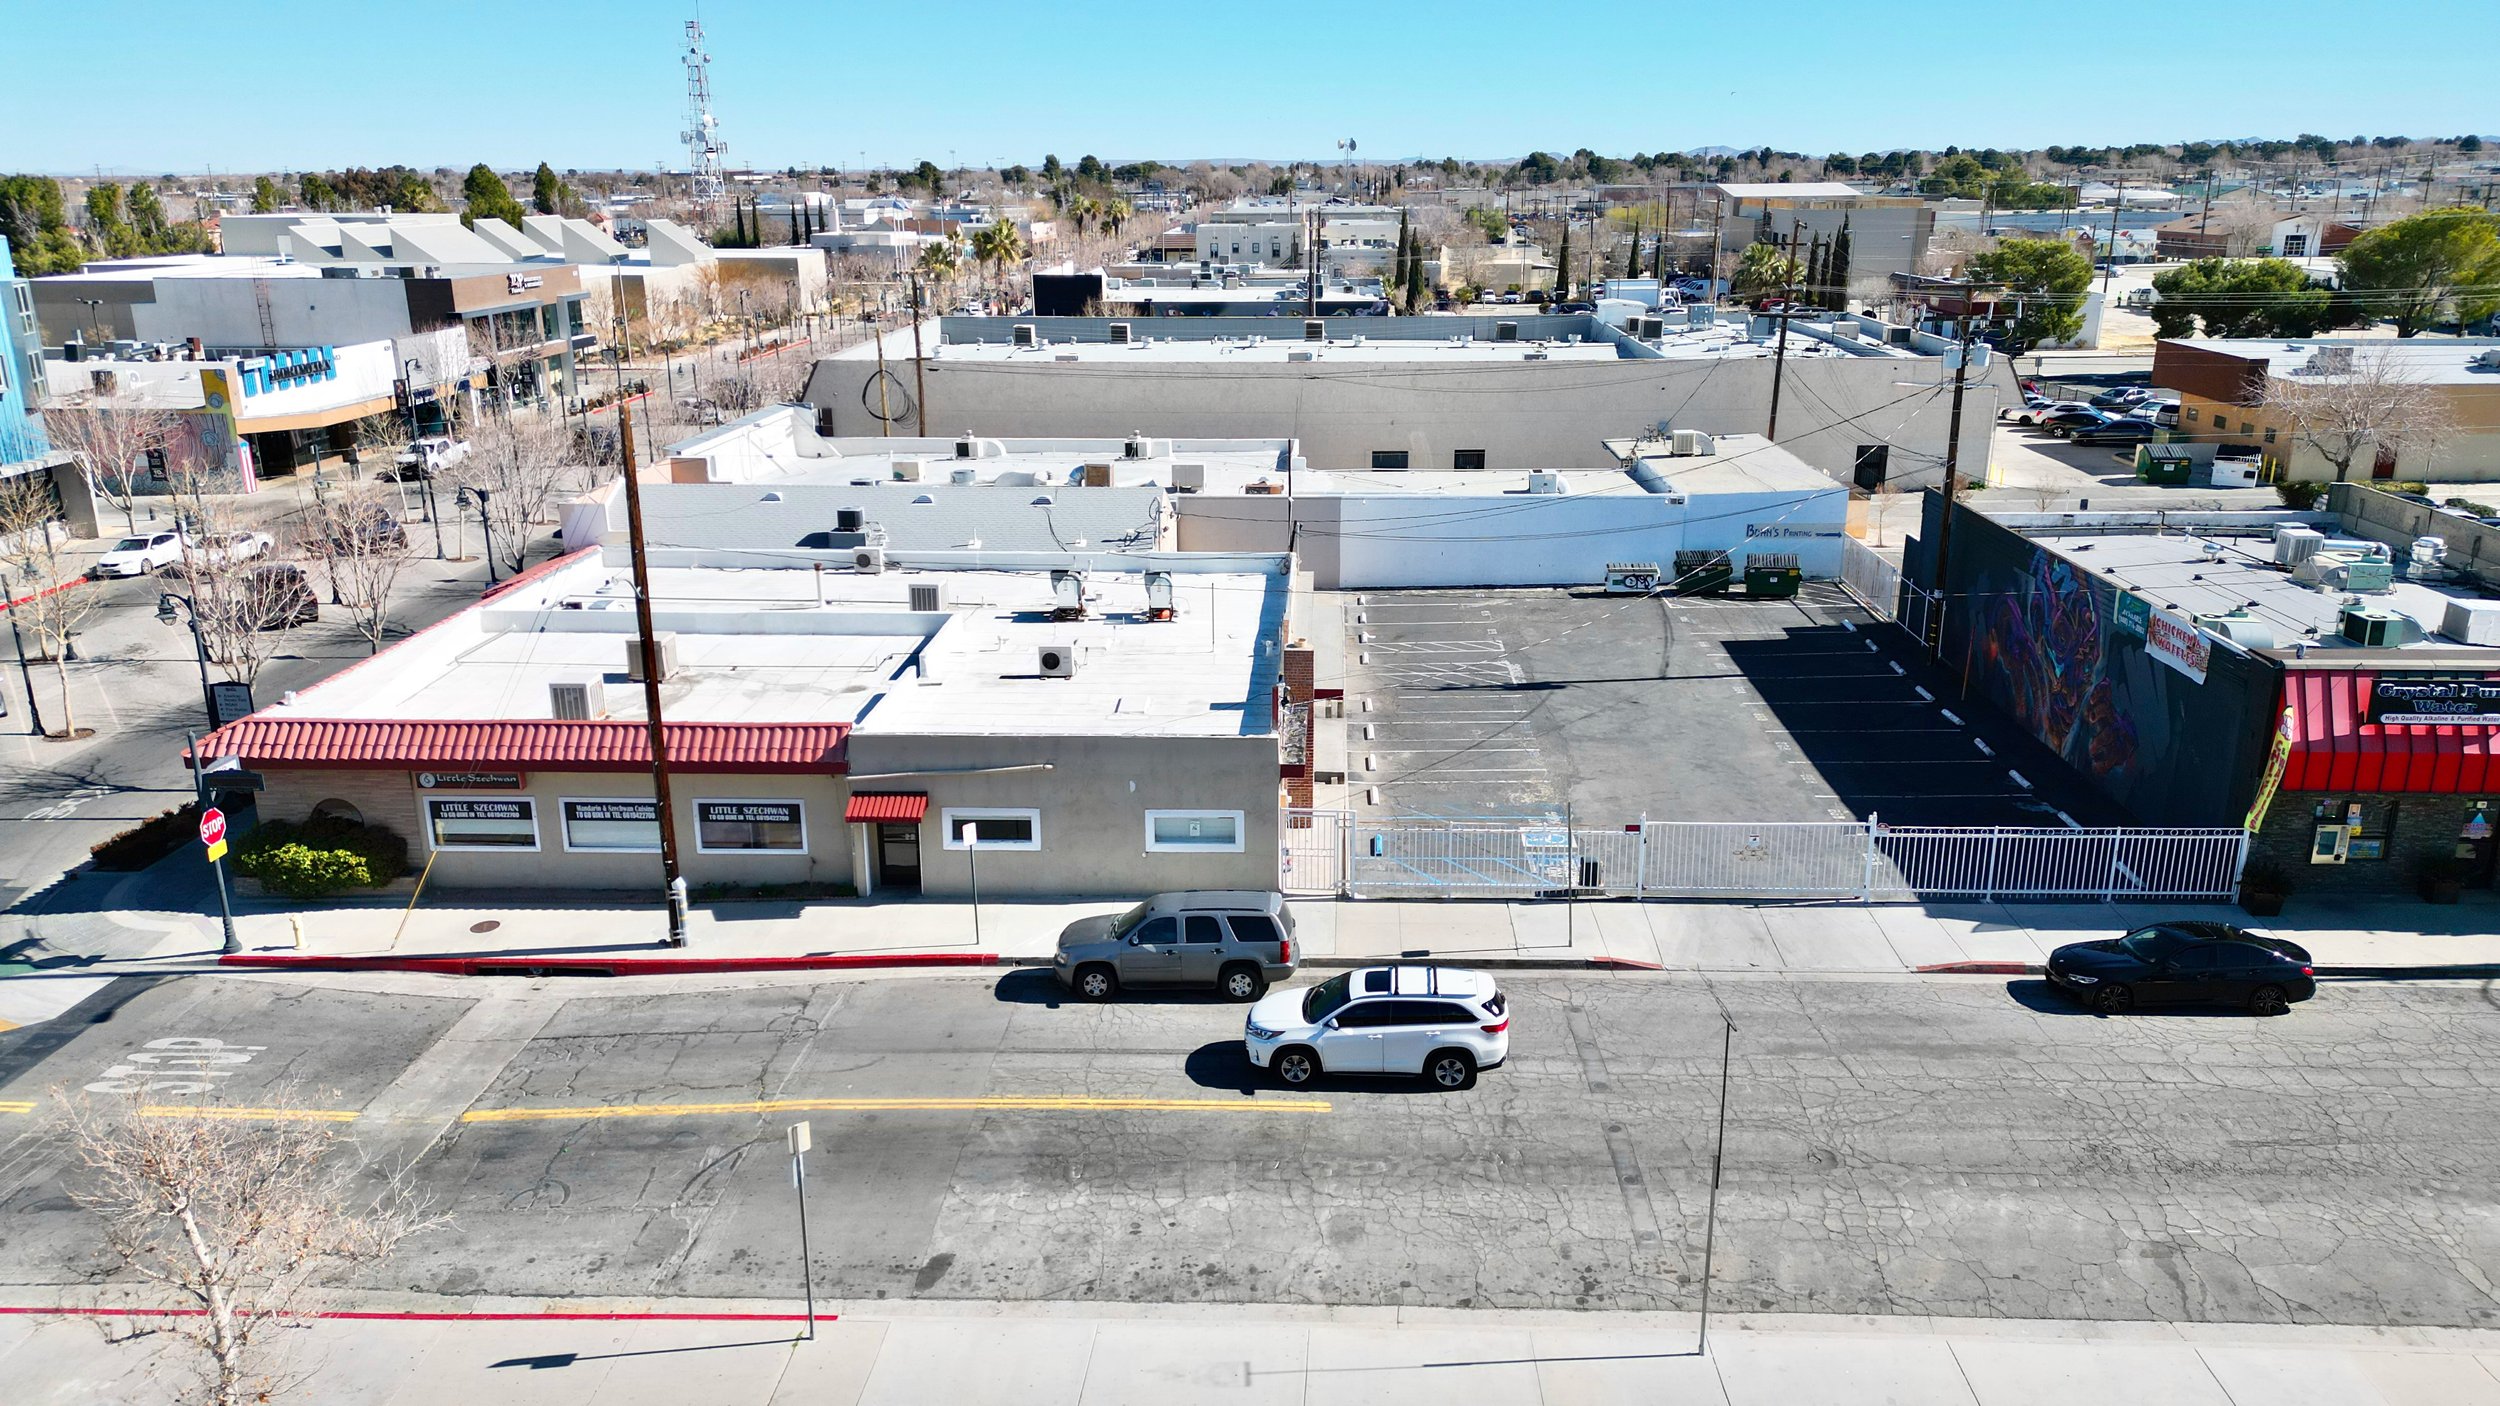 Drone shot of a street corner with red-roofed buildings, parked cars, and mural art on a clear day.